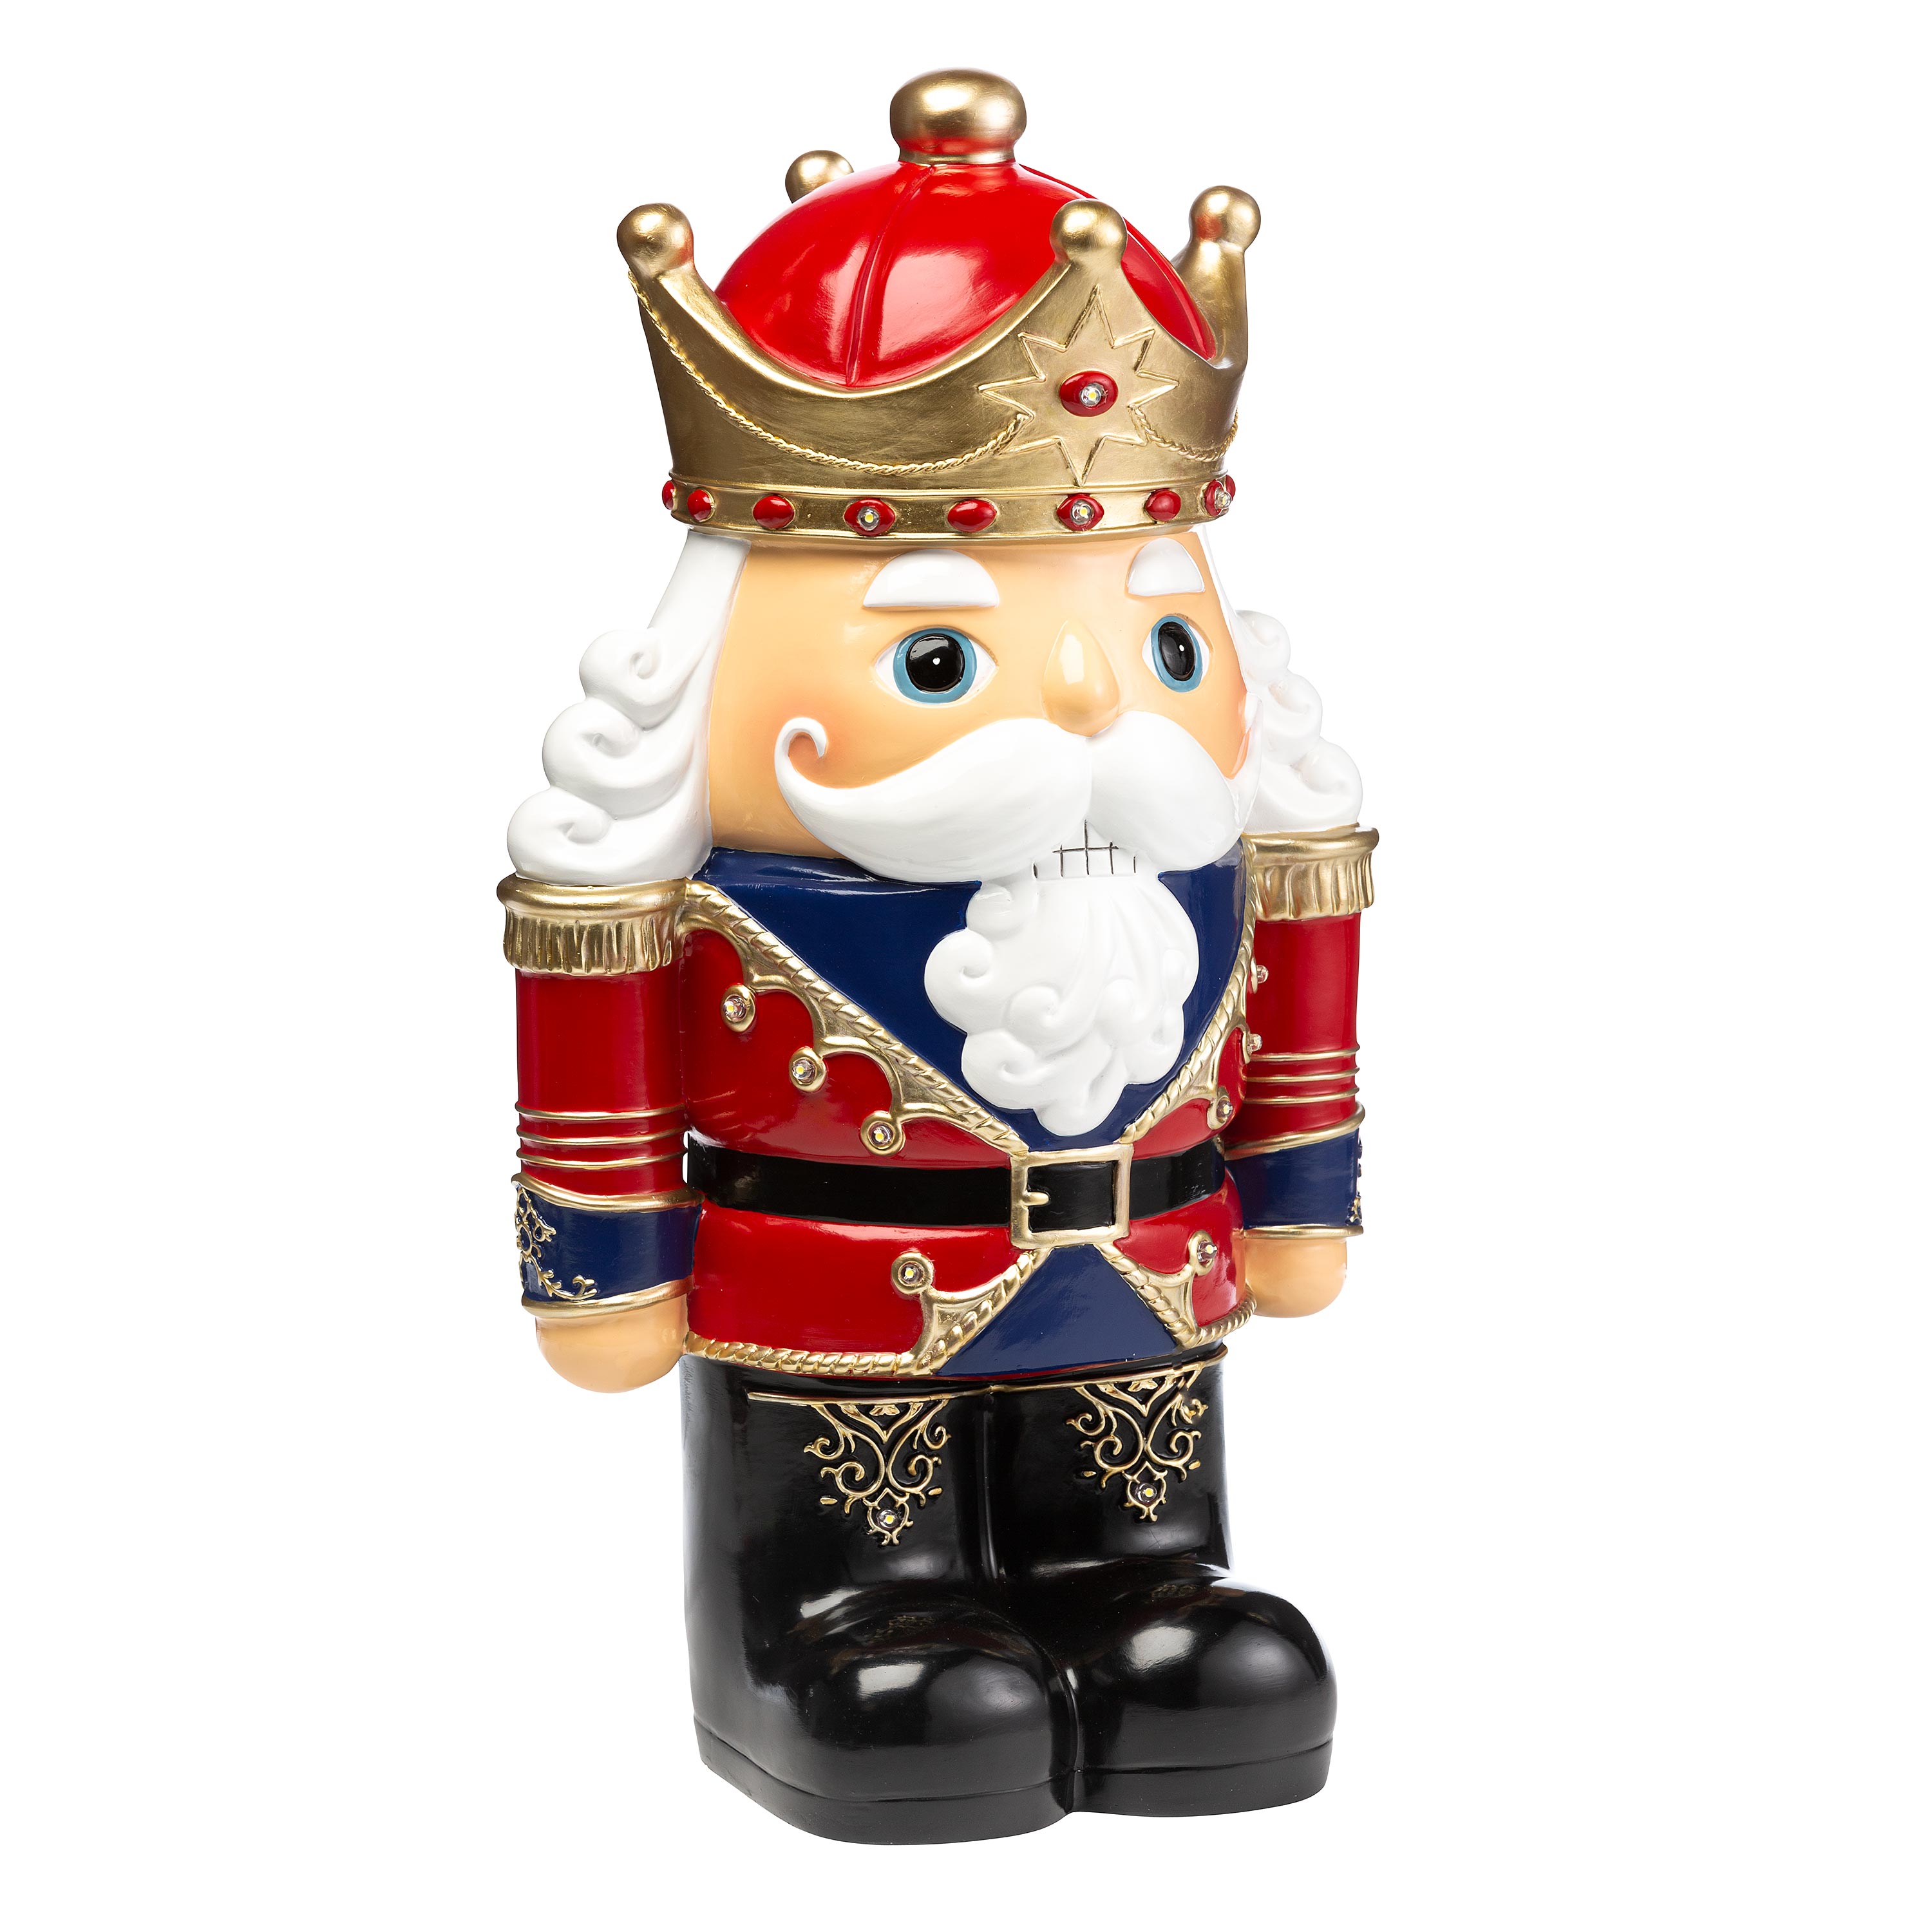 Indoor/Outdoor Lighted Nutcracker Shorty Statue - White | Plow u0026 Hearth